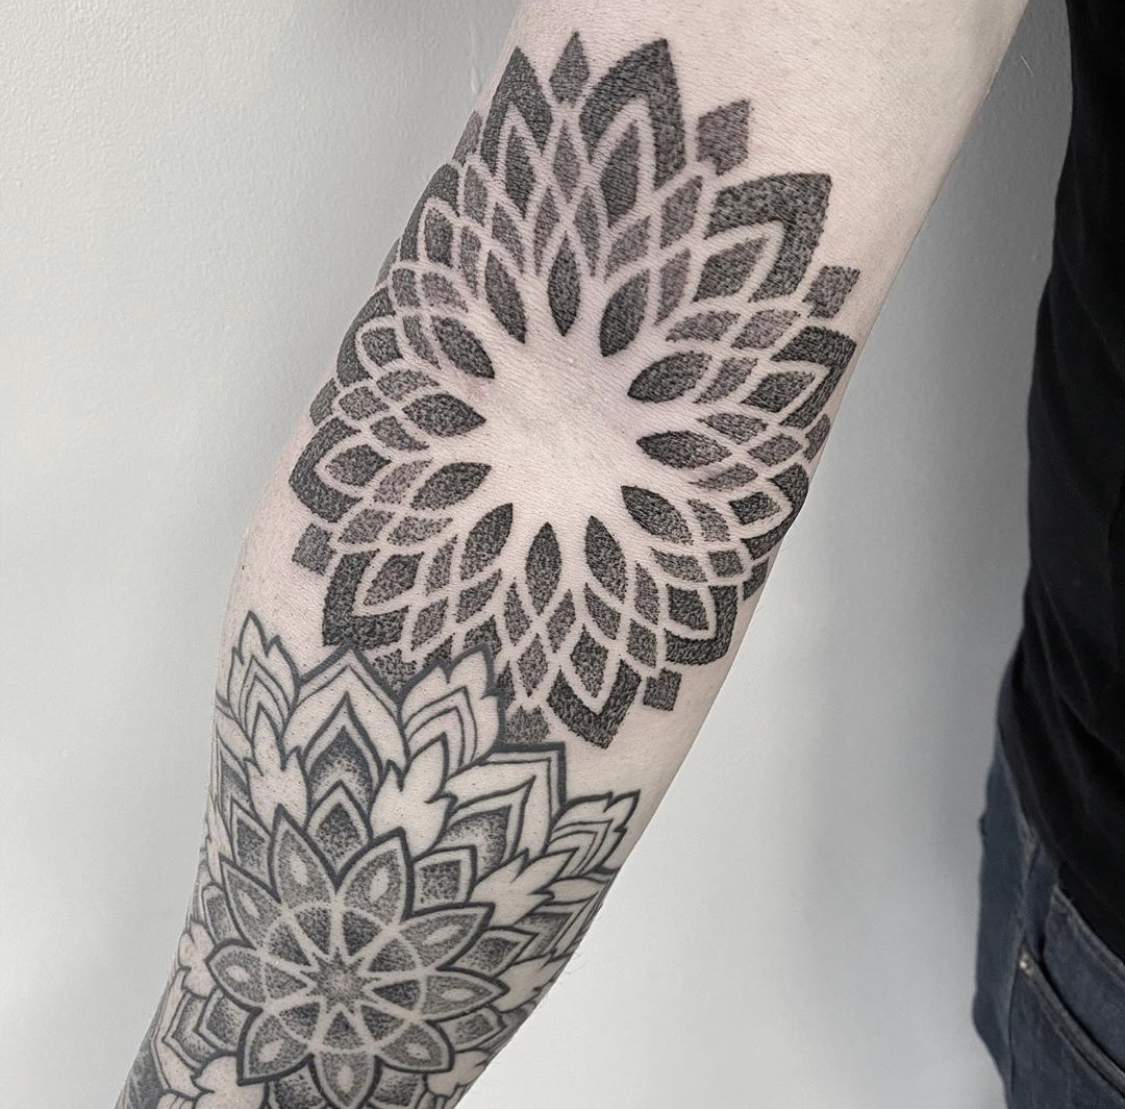 My favorite spot to put a mandala is on the elbow. The top is healed. Done  at @pristineink #dallastattooartist #mandalatattoo #dotworktattoo |  Instagram